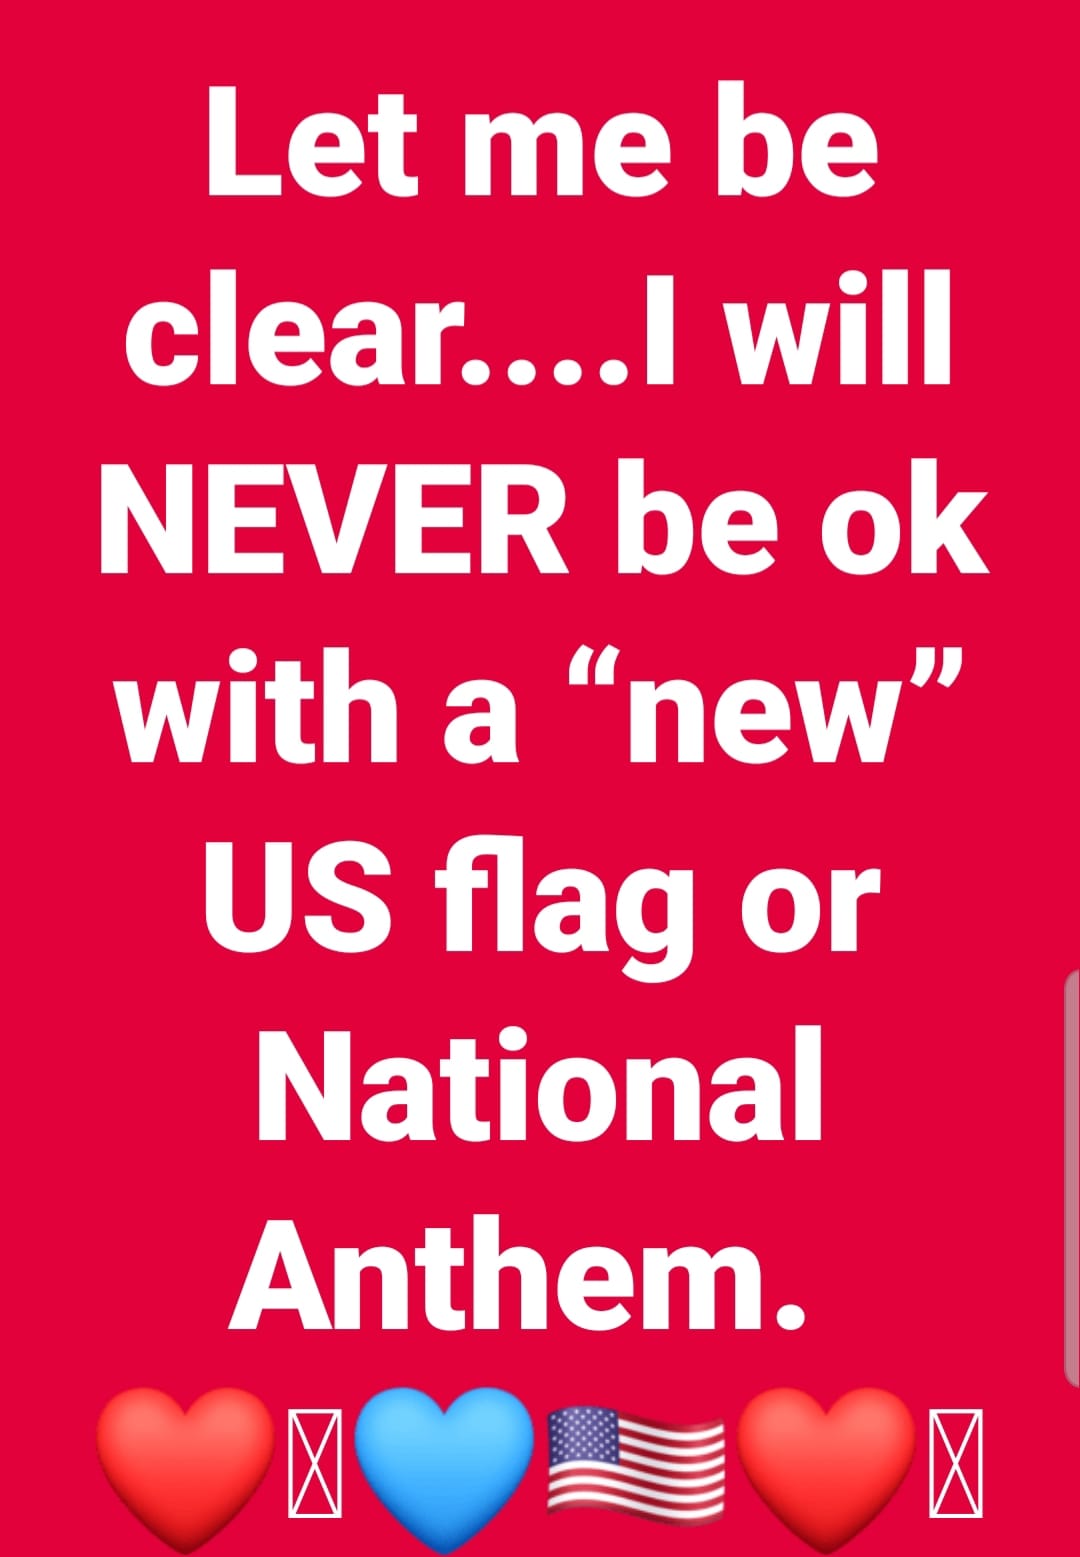 Political, Guam, America, United States, Star Spangled Banner, Hawaii boomer memes Political, Guam, America, United States, Star Spangled Banner, Hawaii text: Let me be clear....l will NEVER be 0k with a 